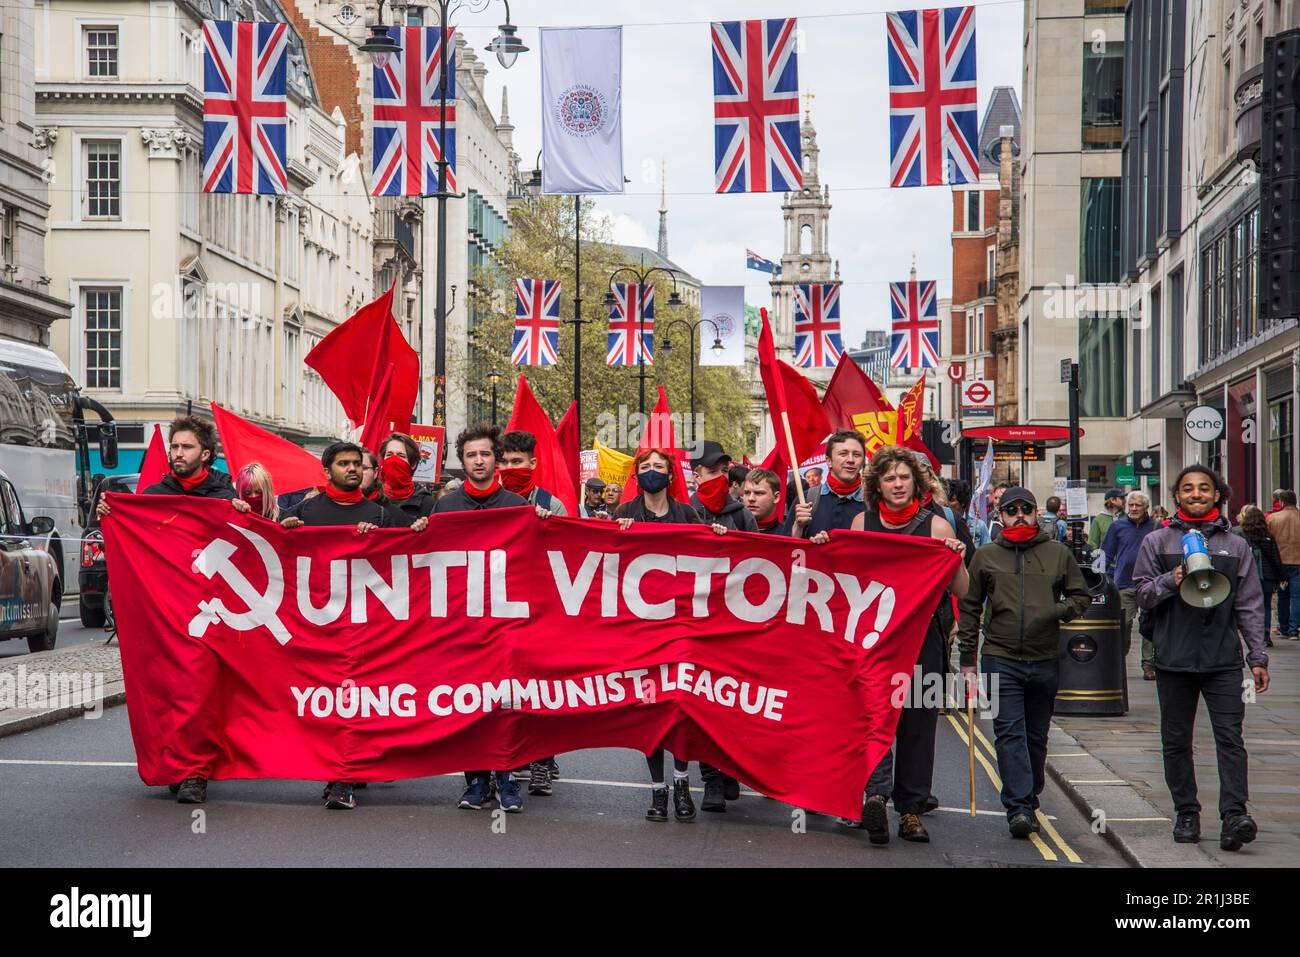 Young Communist League, May Day International Workers' Day Rally, London, England, UK, 01/05/2023 Stockfoto